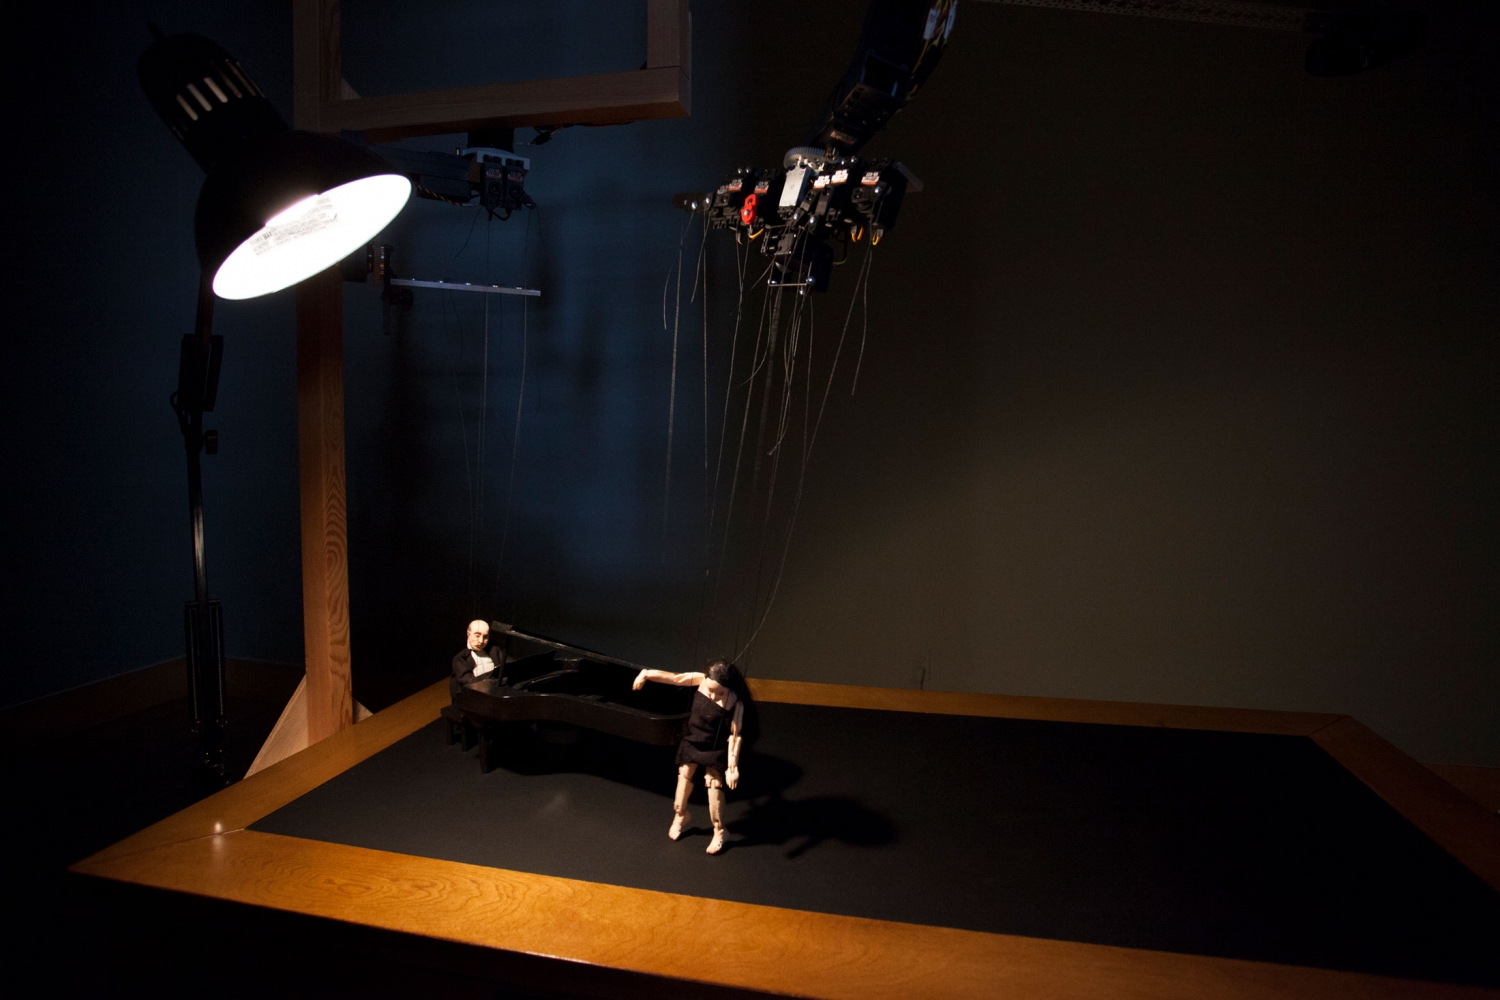 Janet Cardiff and George Bures Miller
Sad Waltz and the Dancer who couldn&amp;#39;t dance, 2015
Detail
Mixed media installation including wooden desk, marionettes, robotics, audio, and lighting
Duration: Approximately 4 minutes, looped
55 1/16 x 27 1/2 x 62 15/16 inches
(140 x 70 x 160 cm)
Installation view,&amp;nbsp;THE POETRY MACHINE &amp;amp; Other Works
May 3 &amp;ndash;&amp;nbsp;July 5, 2018
Fraenkel Gallery, San Francisco